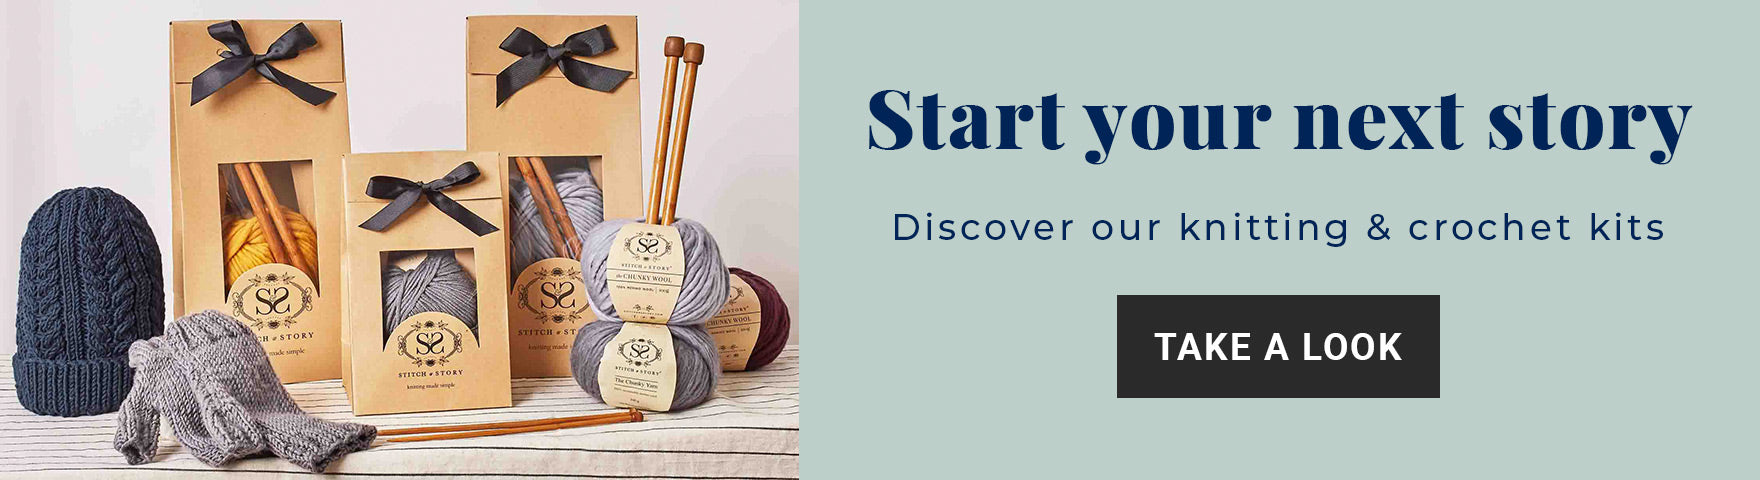 Shop for knitting and crochet kits at Stitch & Story